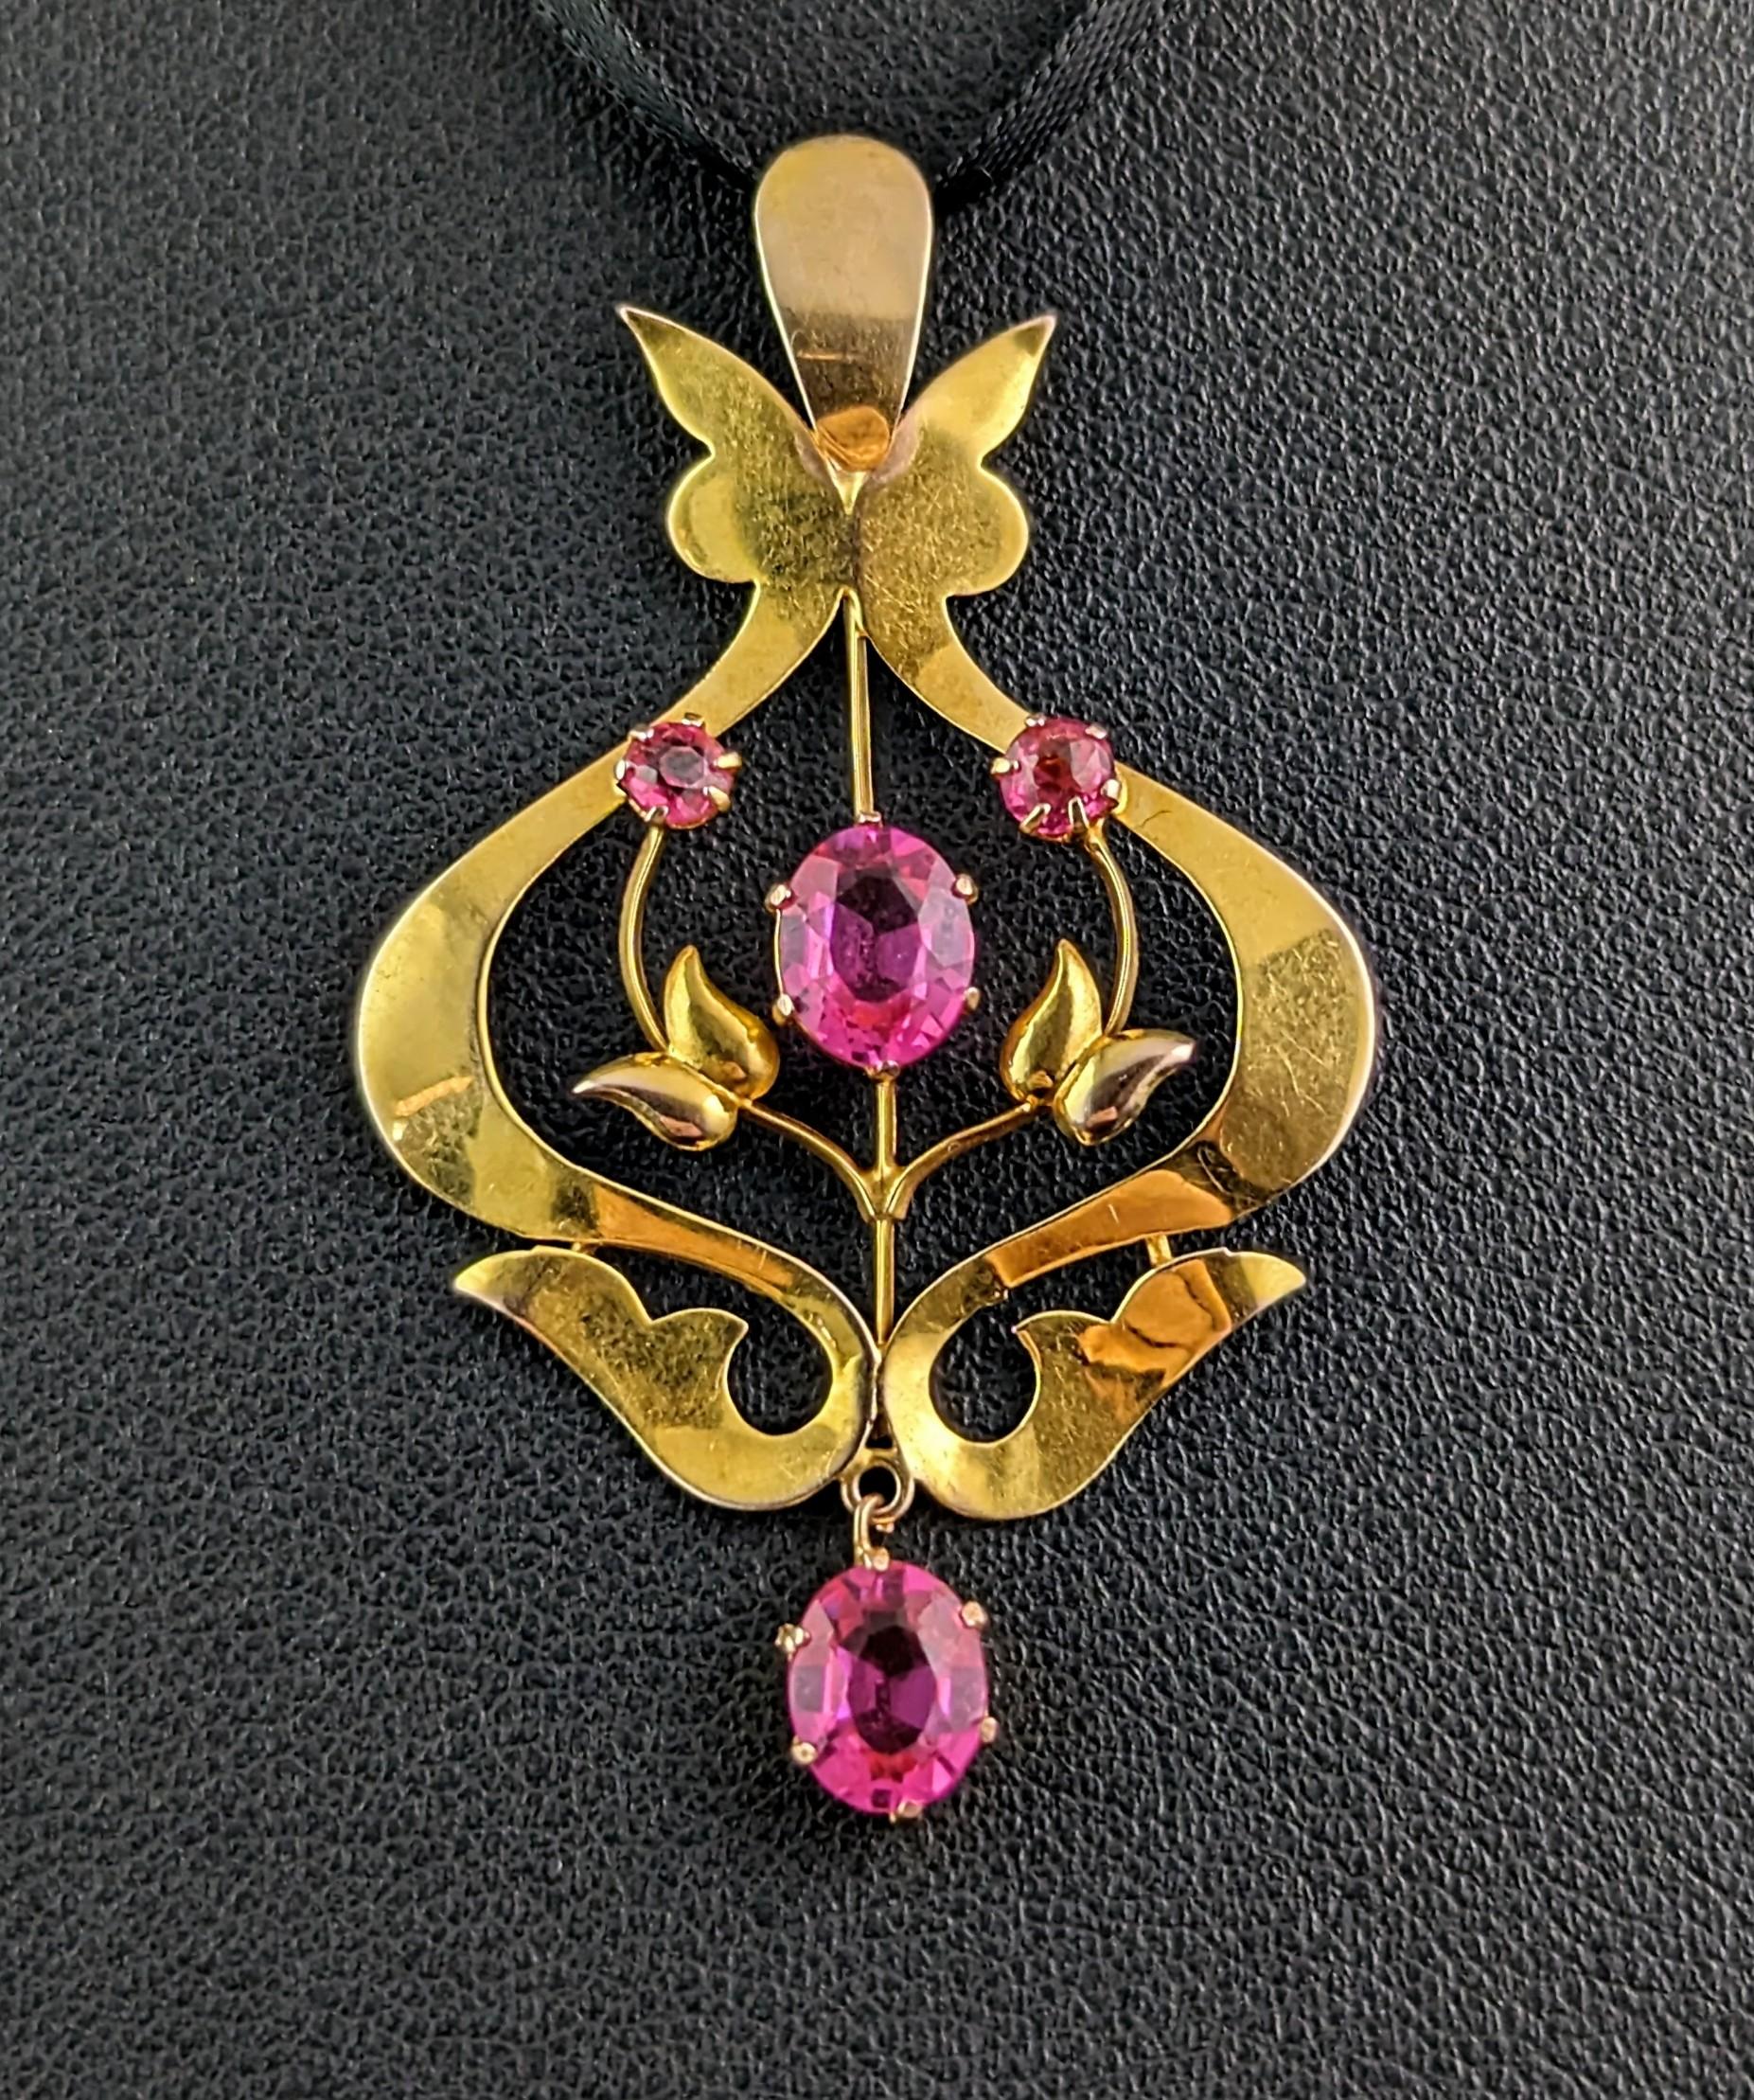 This antique, Art Nouveau era, 9ct gold and pink paste pendant really pops.

It is a lavaliere style pendant, typically popular in the Edwardian / Art Nouveau era, they were usually light and delicate settings but with elaborate designs and skillful